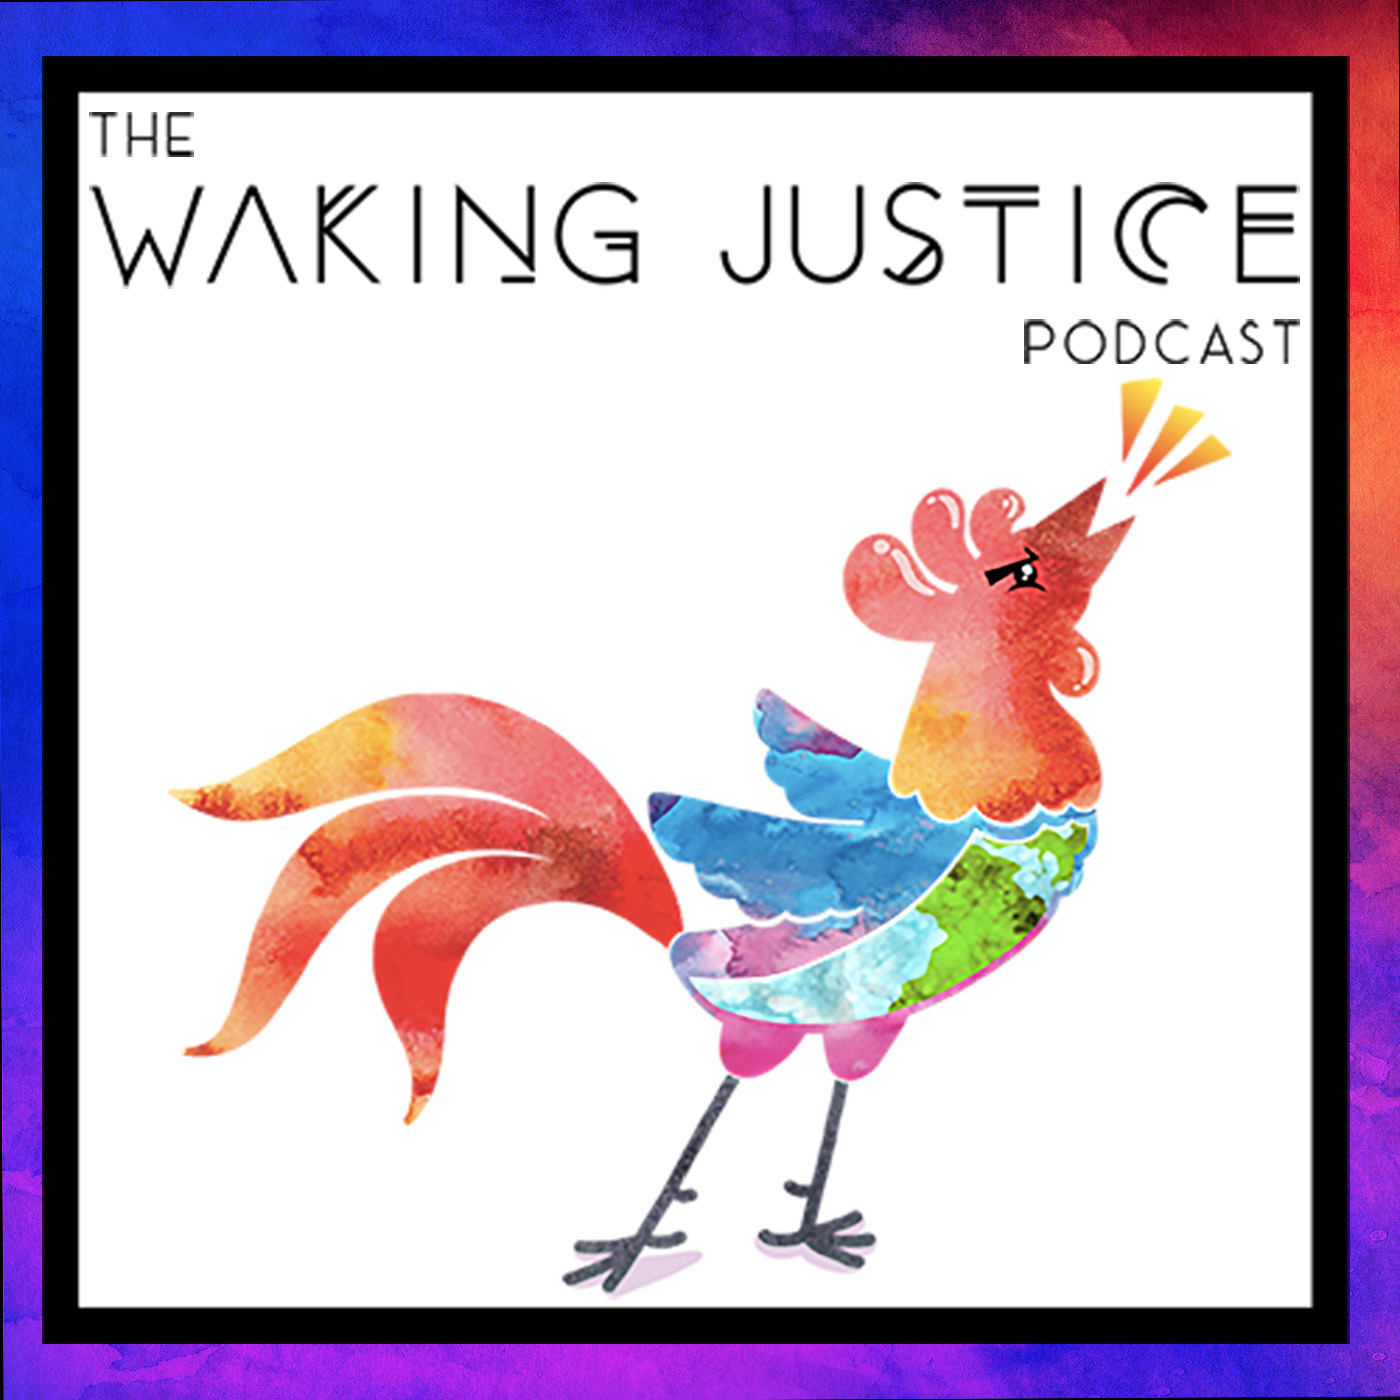 The WAKING JUSTICE Podcast